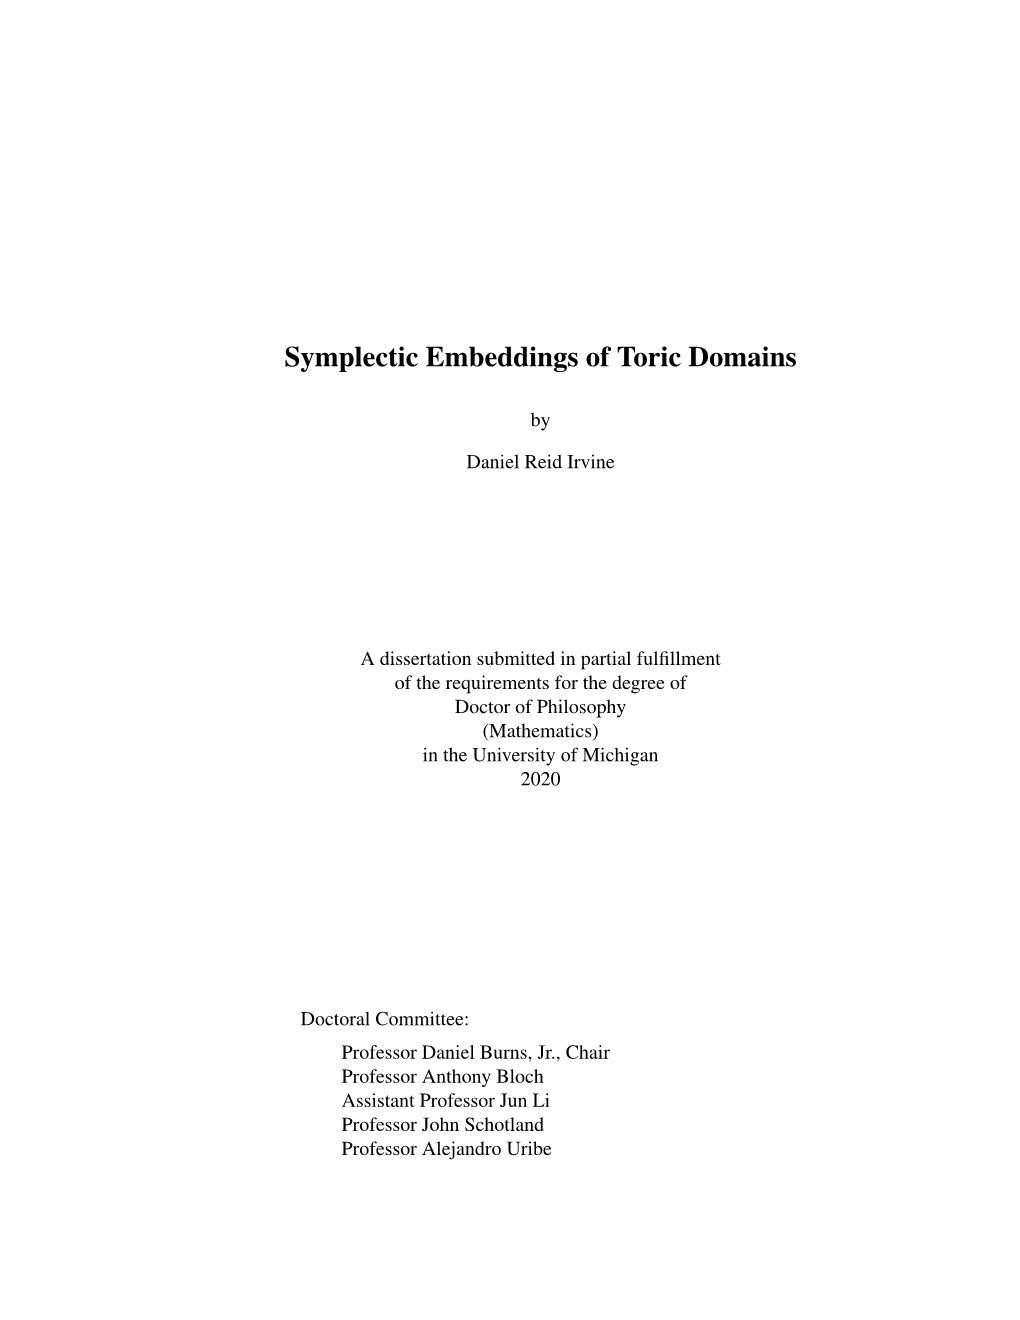 Symplectic Embeddings of Toric Domains